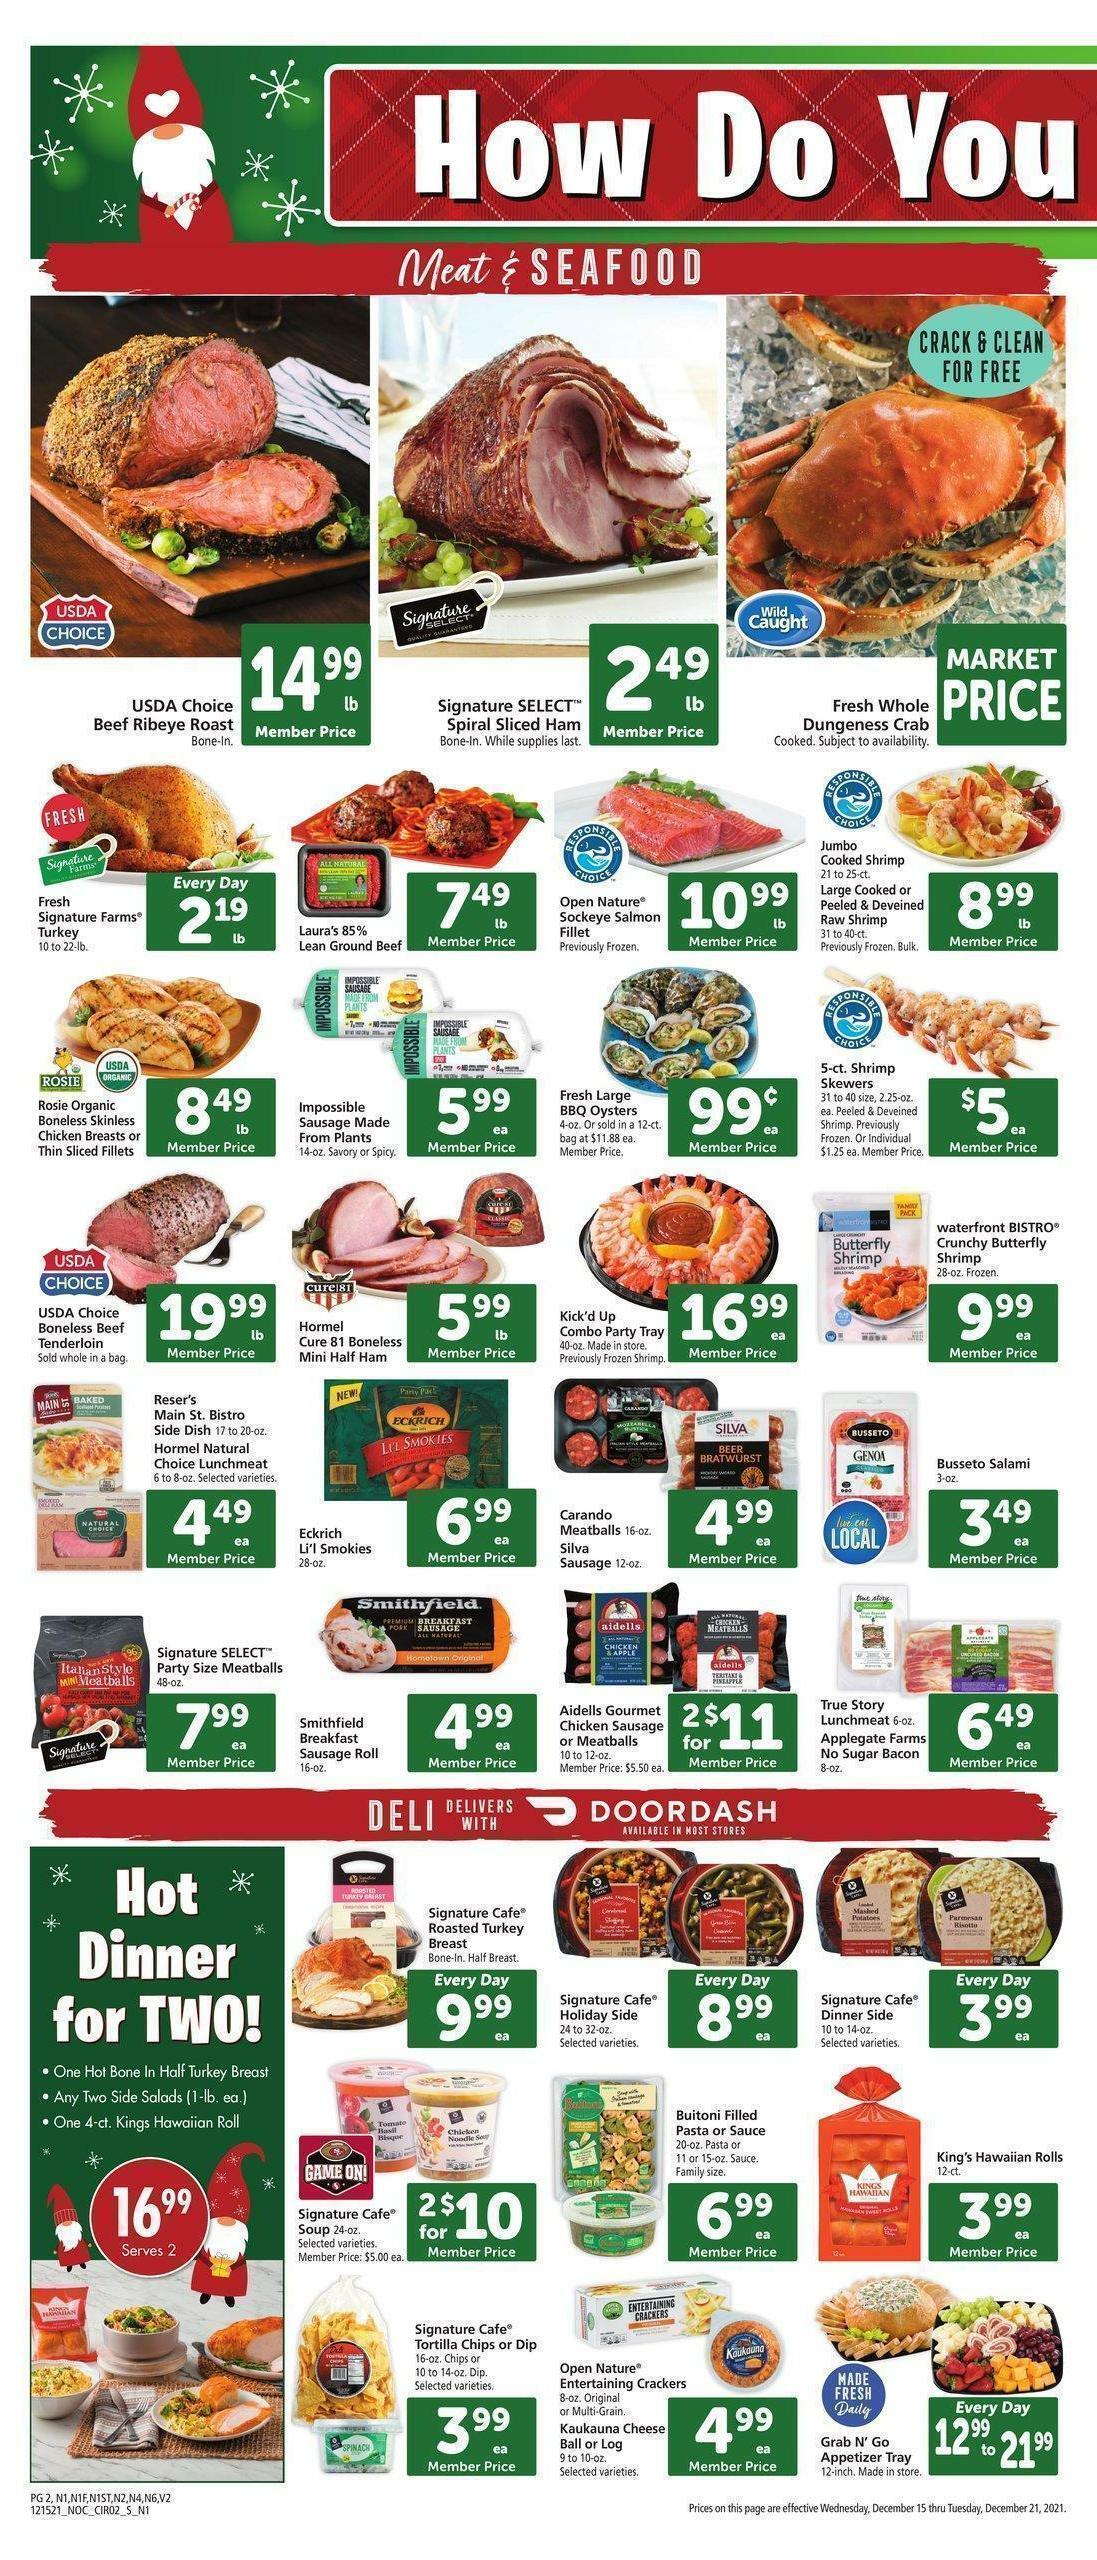 Safeway Weekly Ad from December 15